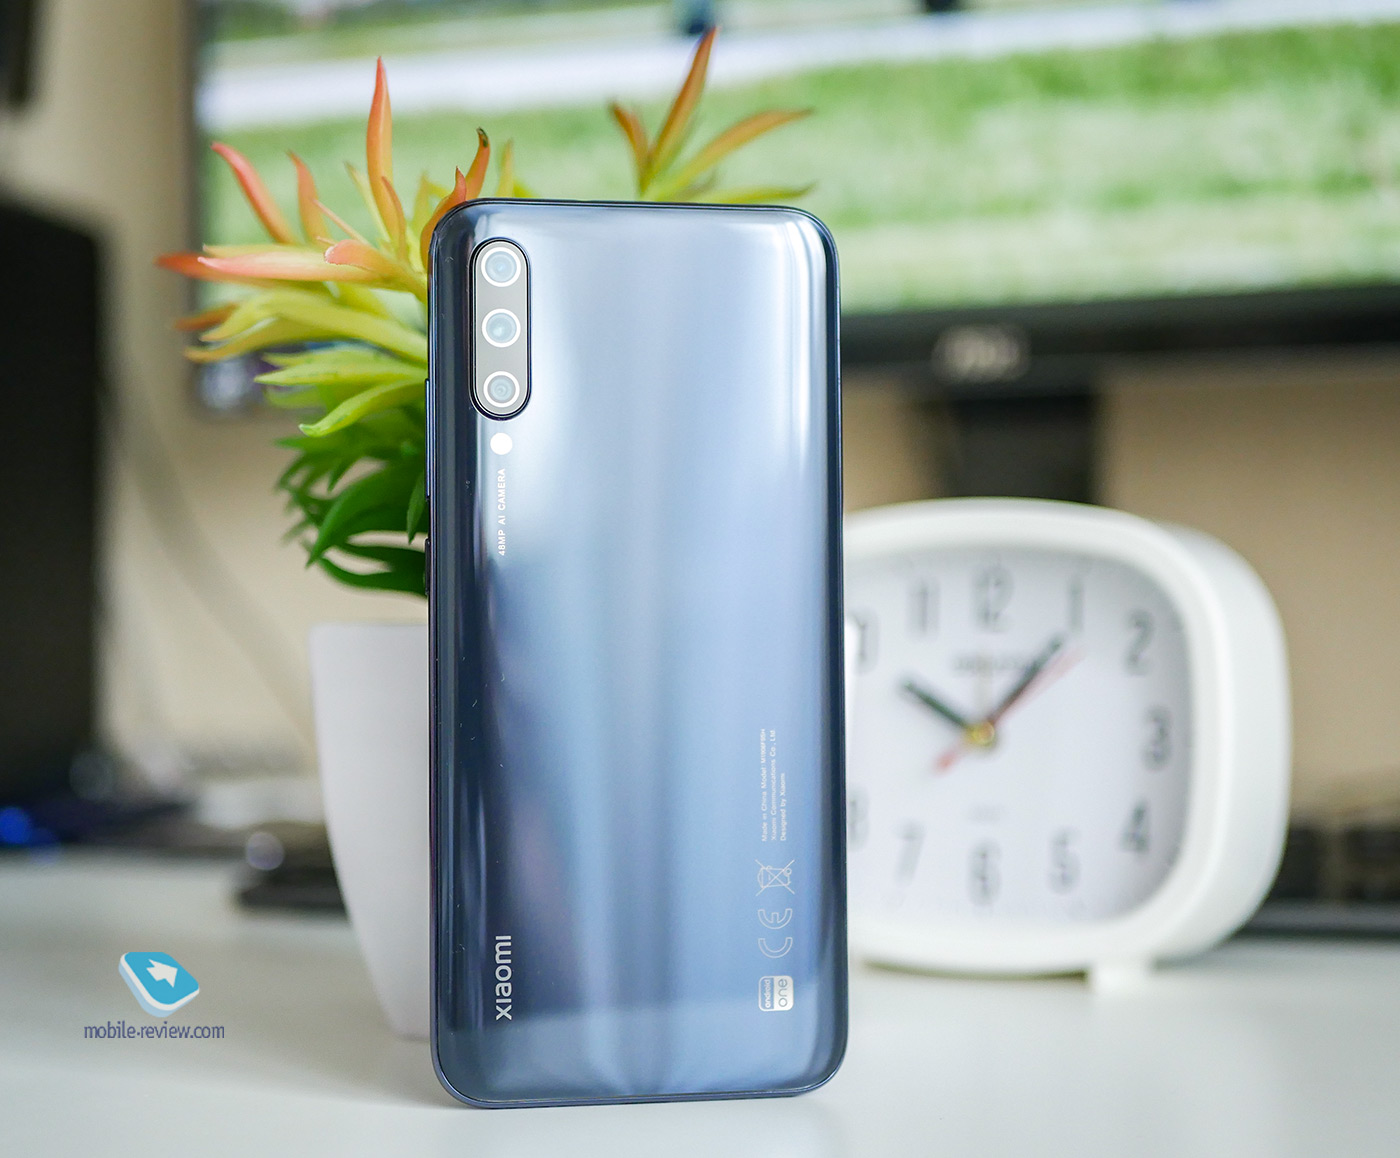 First look at Android One smartphone Xiaomi Mi A3 